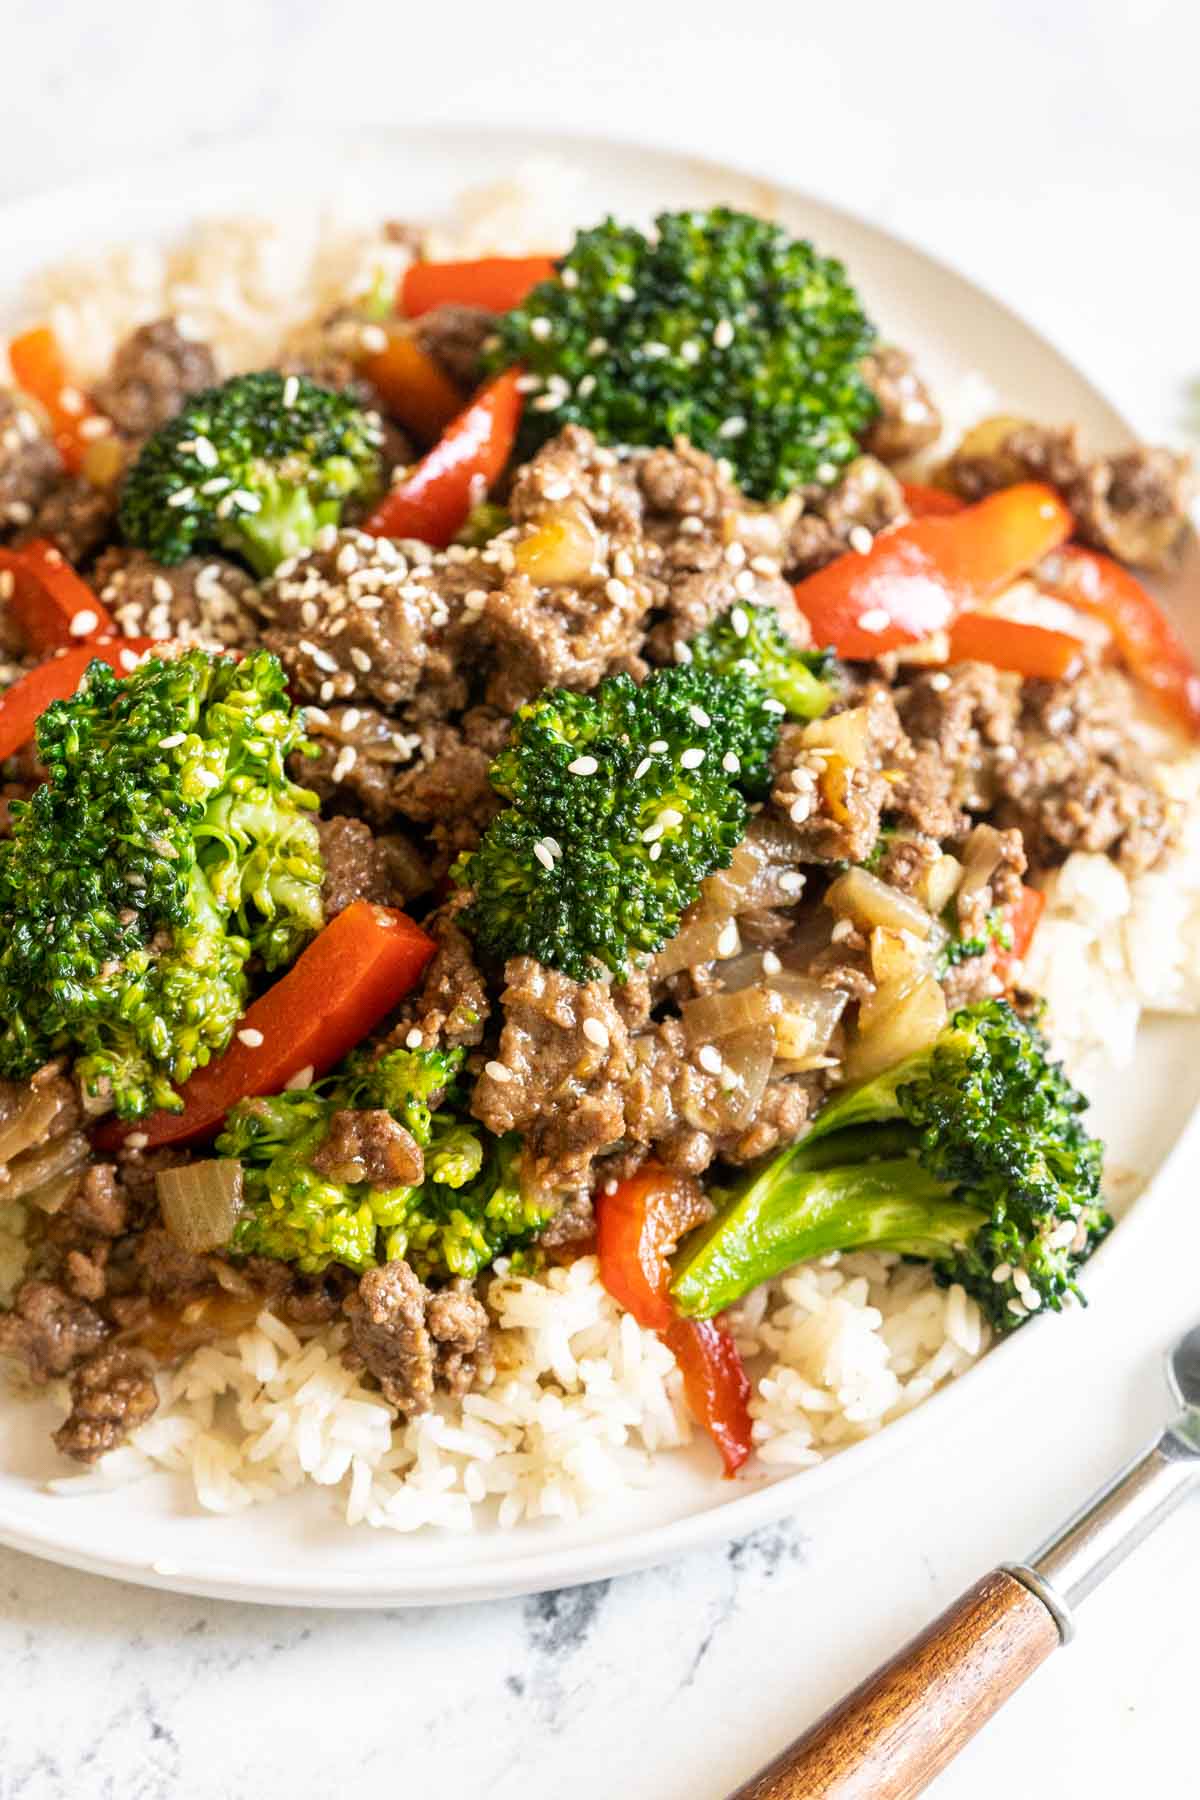 Beef and broccoli with red peppers over rice.